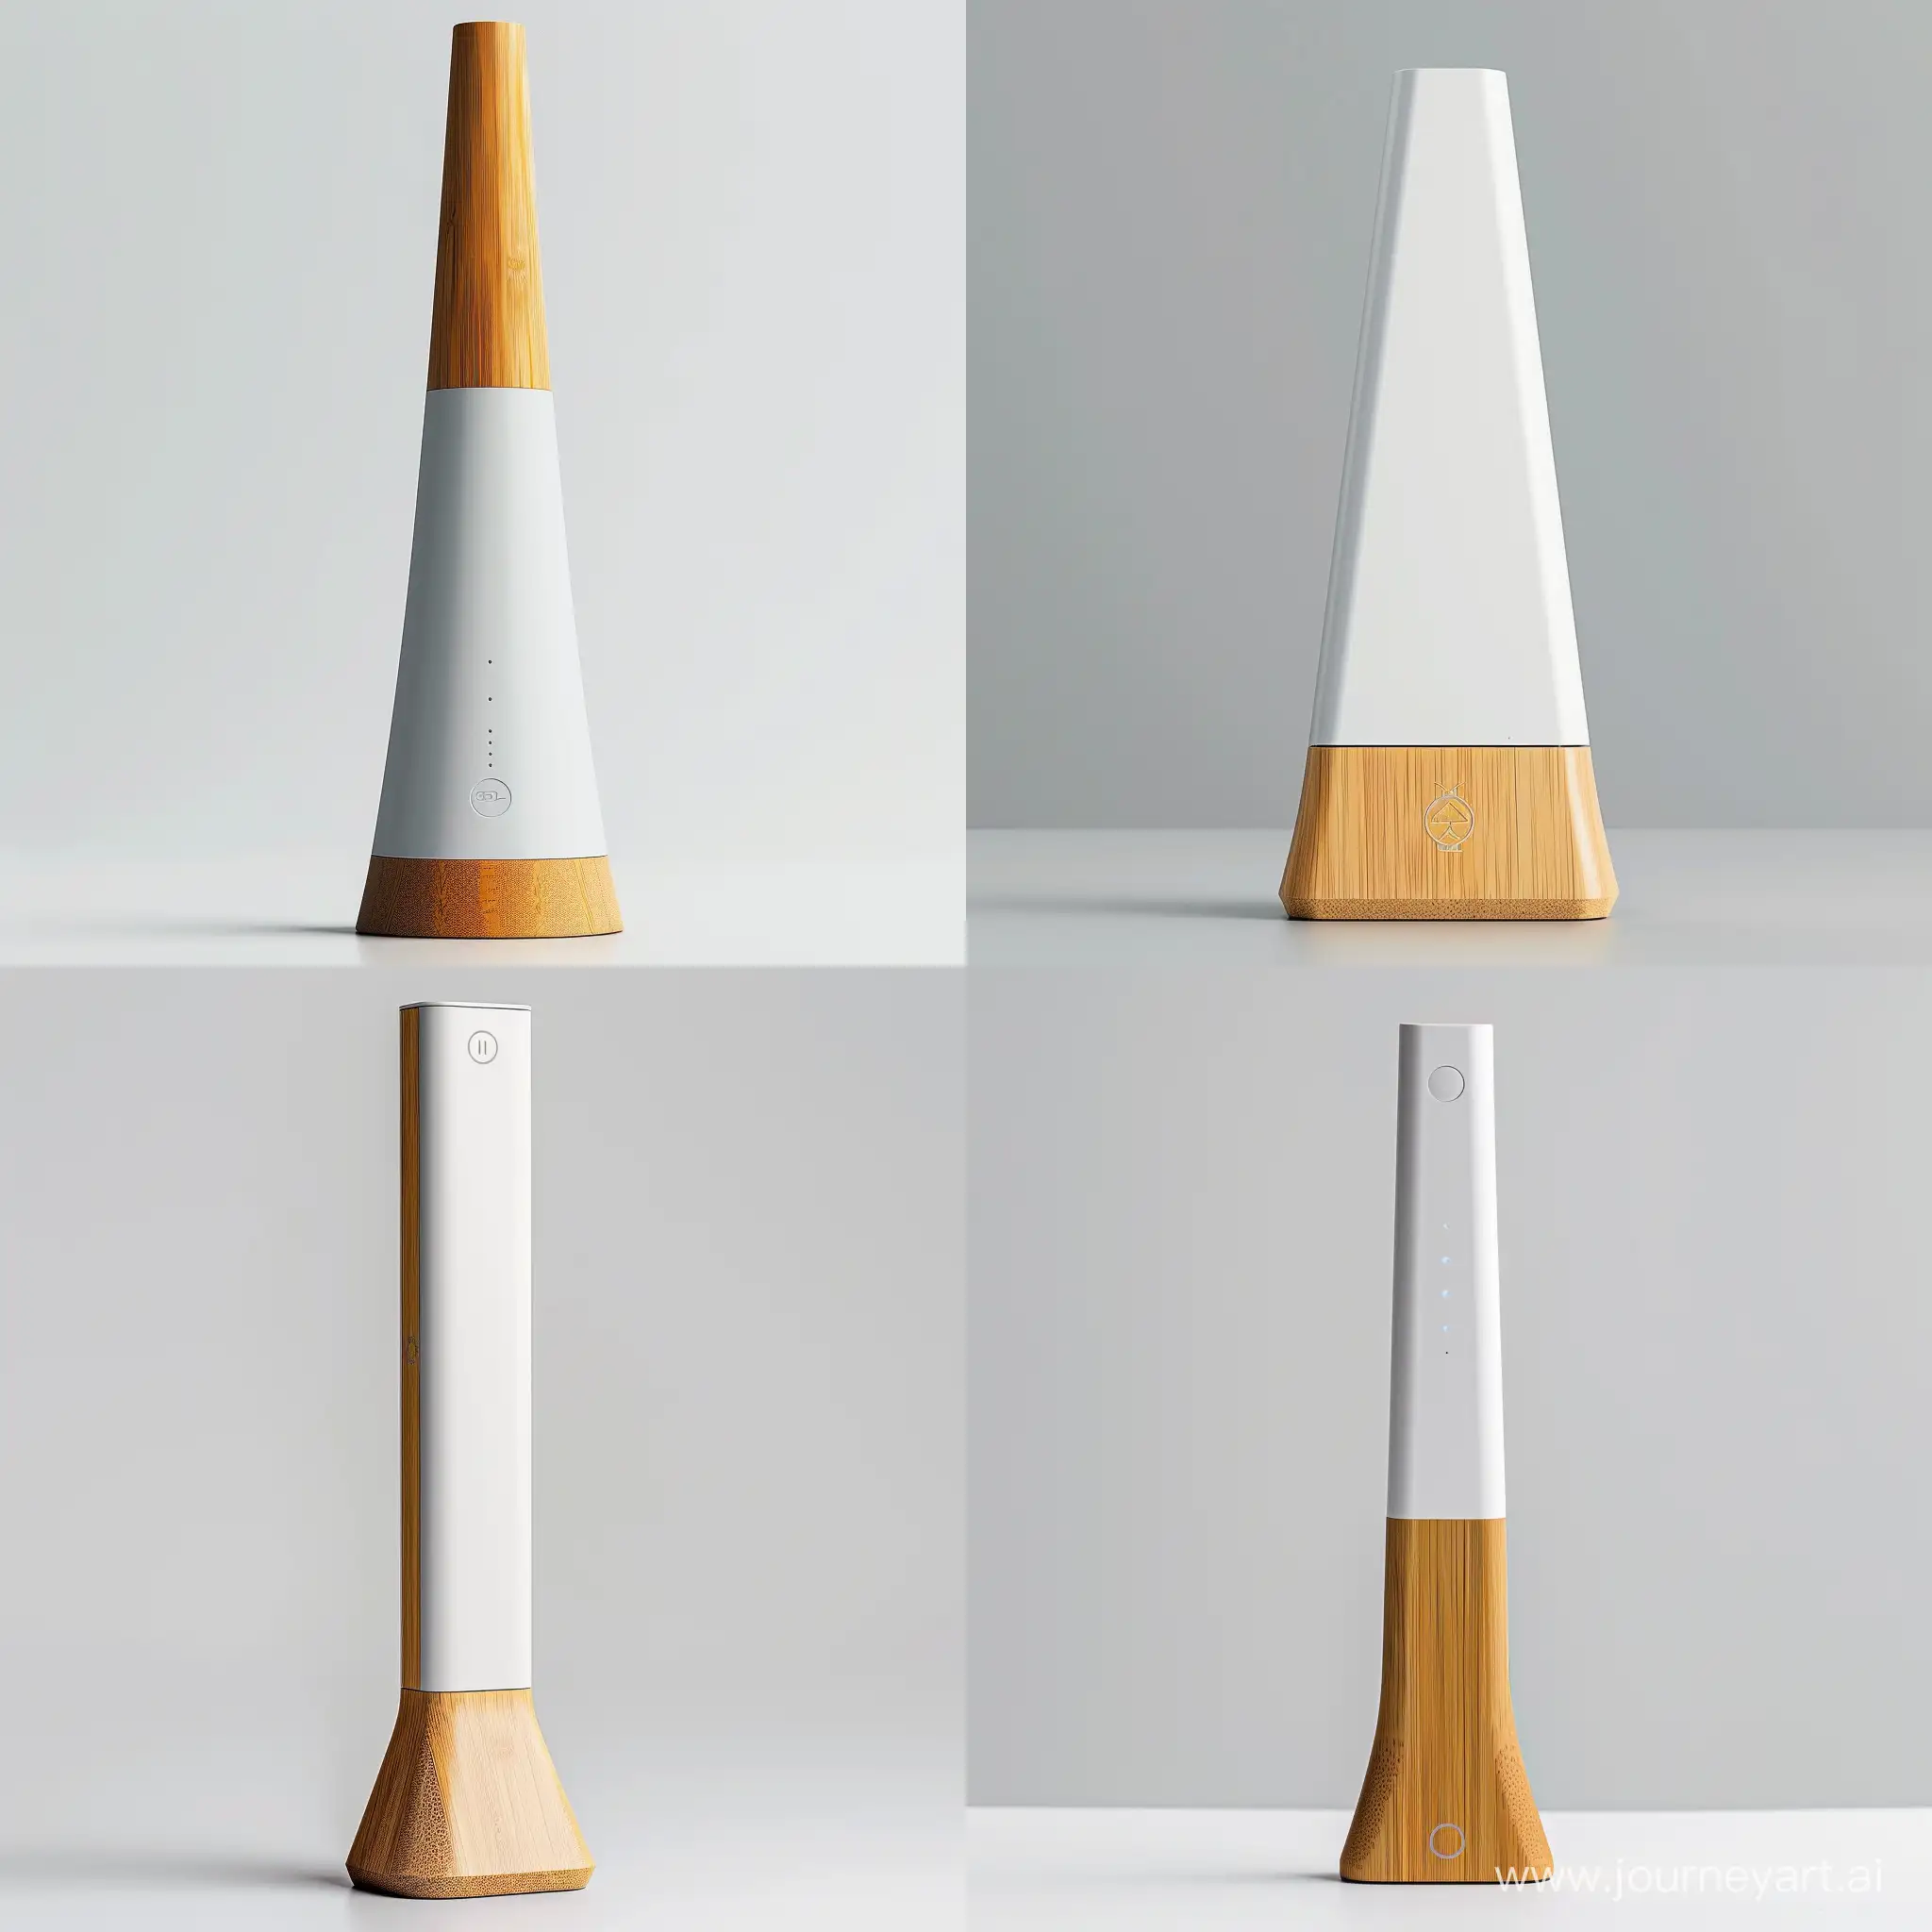 "Imagine a slender, stand-alone energy gateway with a slight taper towards the top, inspired by Japanese minimalism. The base is made of sustainable bamboo, while the body is constructed from recycled plastics, finished in white or light gray. Standing 30 cm tall with a base diameter of 8 cm, this device features soft LED lighting for notifications and a laser-engraved logo on the bamboo base. It serves as a central hub for smart home devices, simplifying energy management with a touch of Zen-inspired elegance, blending seamlessly into eco-conscious homes."realistic style